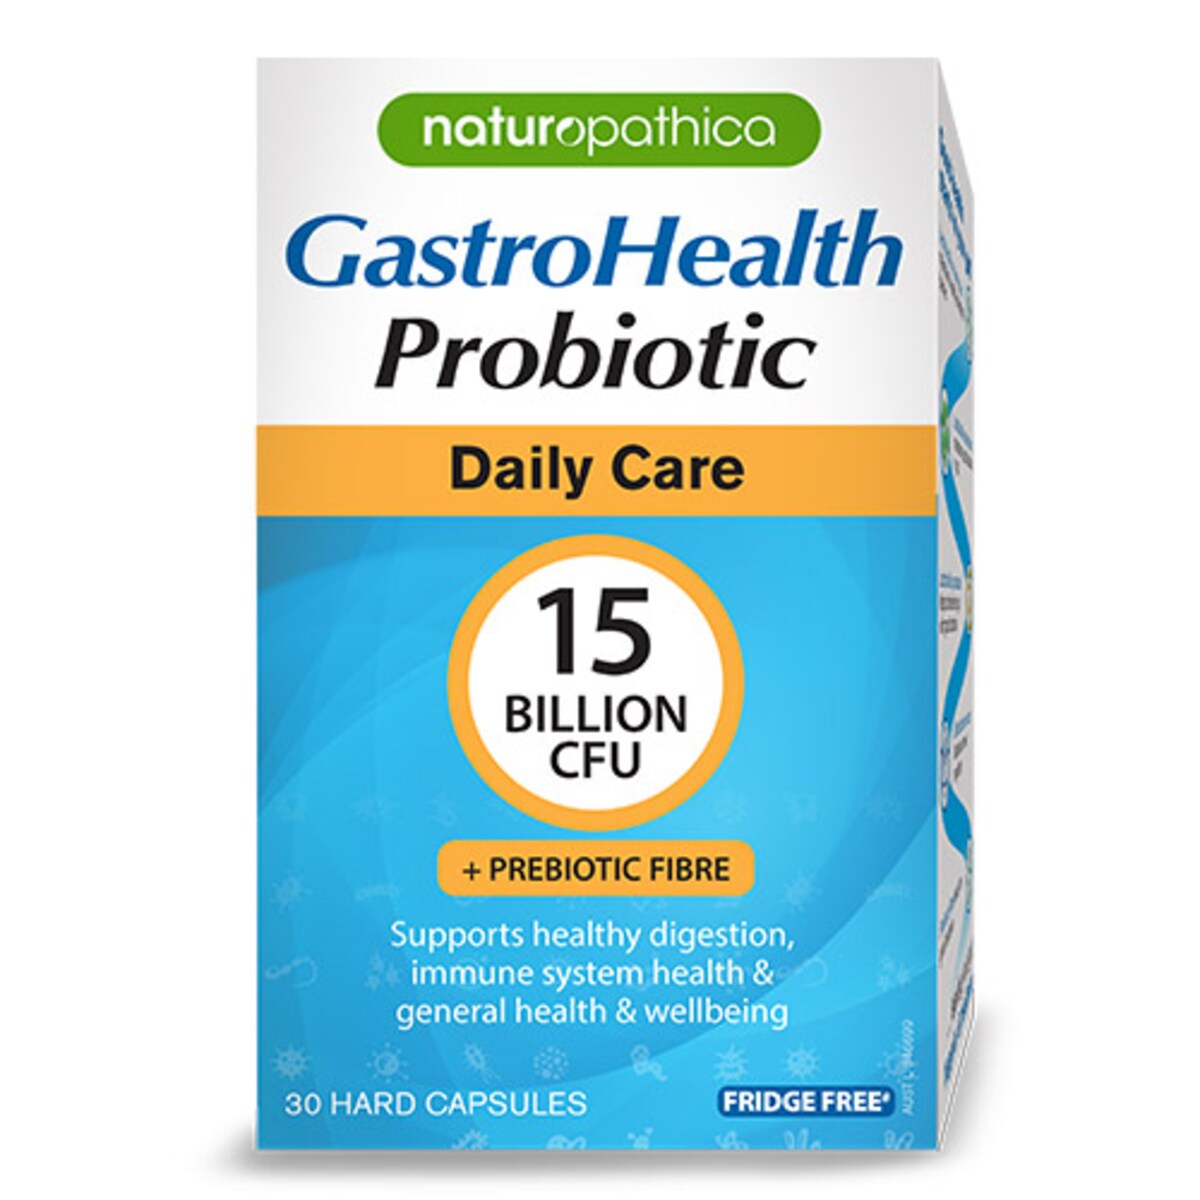 Naturopathica GastroHealth Probiotic Daily Care 30 Capsules